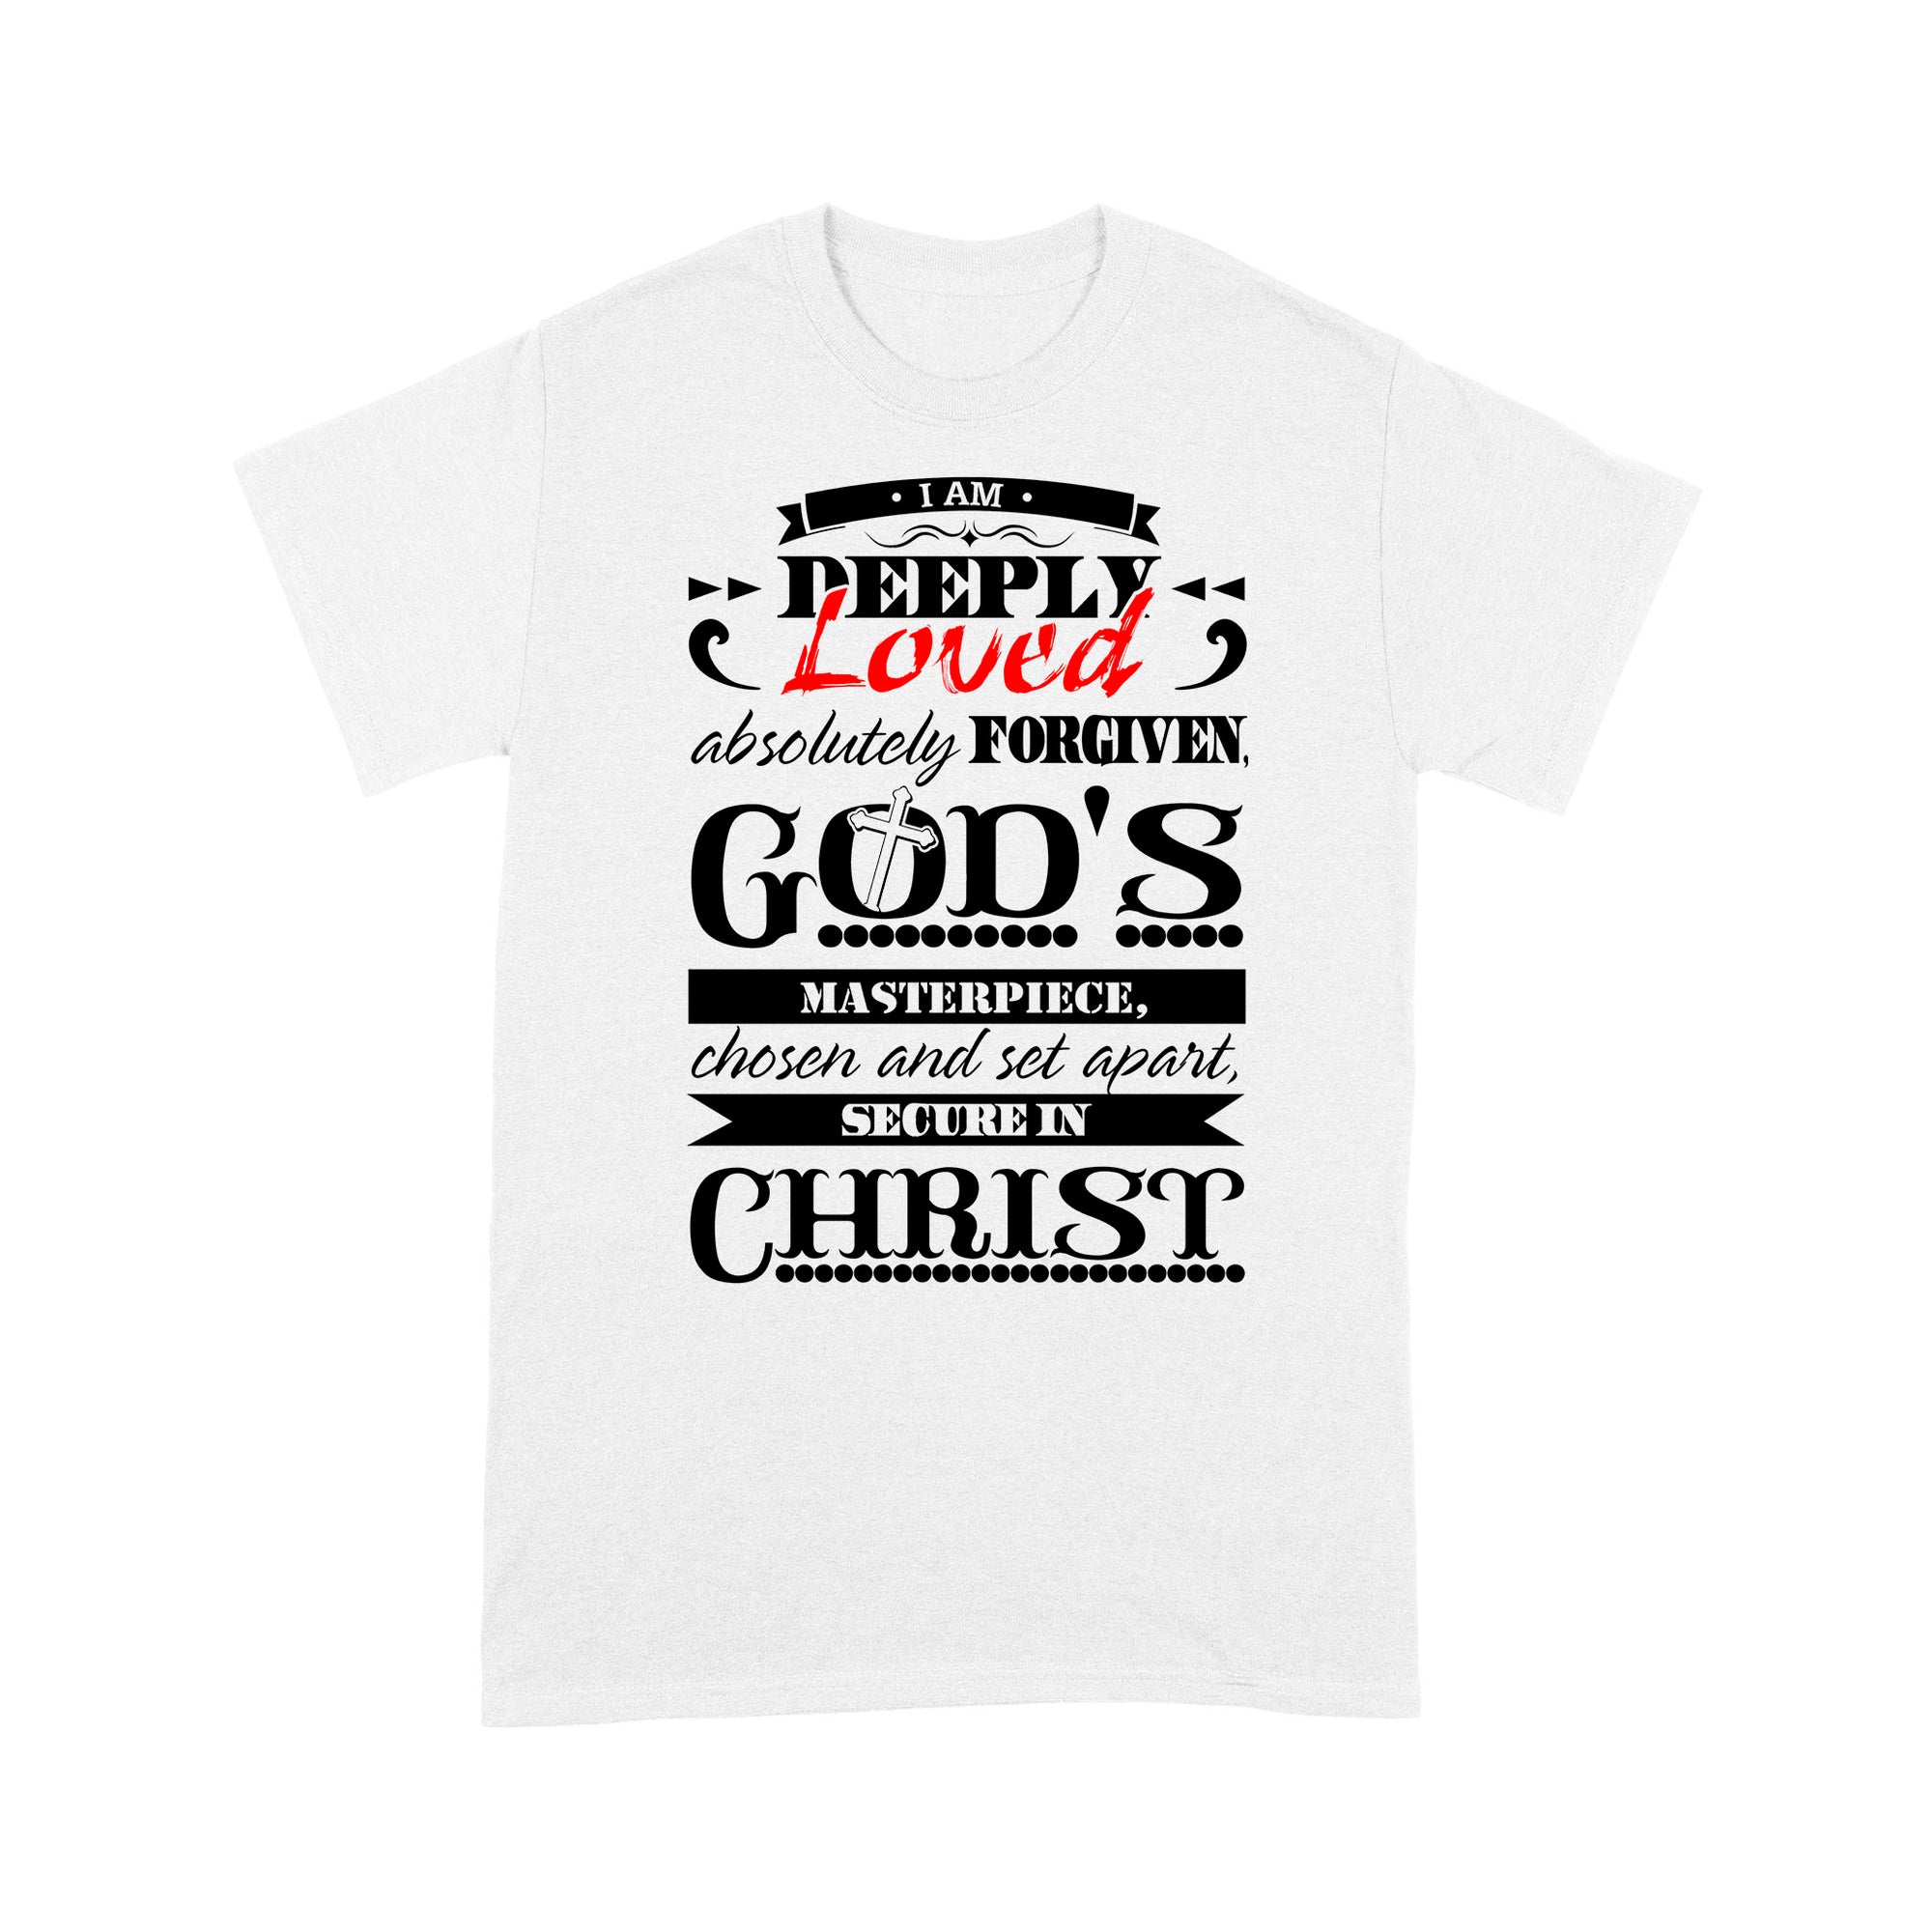 Premium T-shirt - I Am Deeply Loved, Absolutely Forgiven, God's Masterpiece, Chosen and Set Apart, Secure in Christ